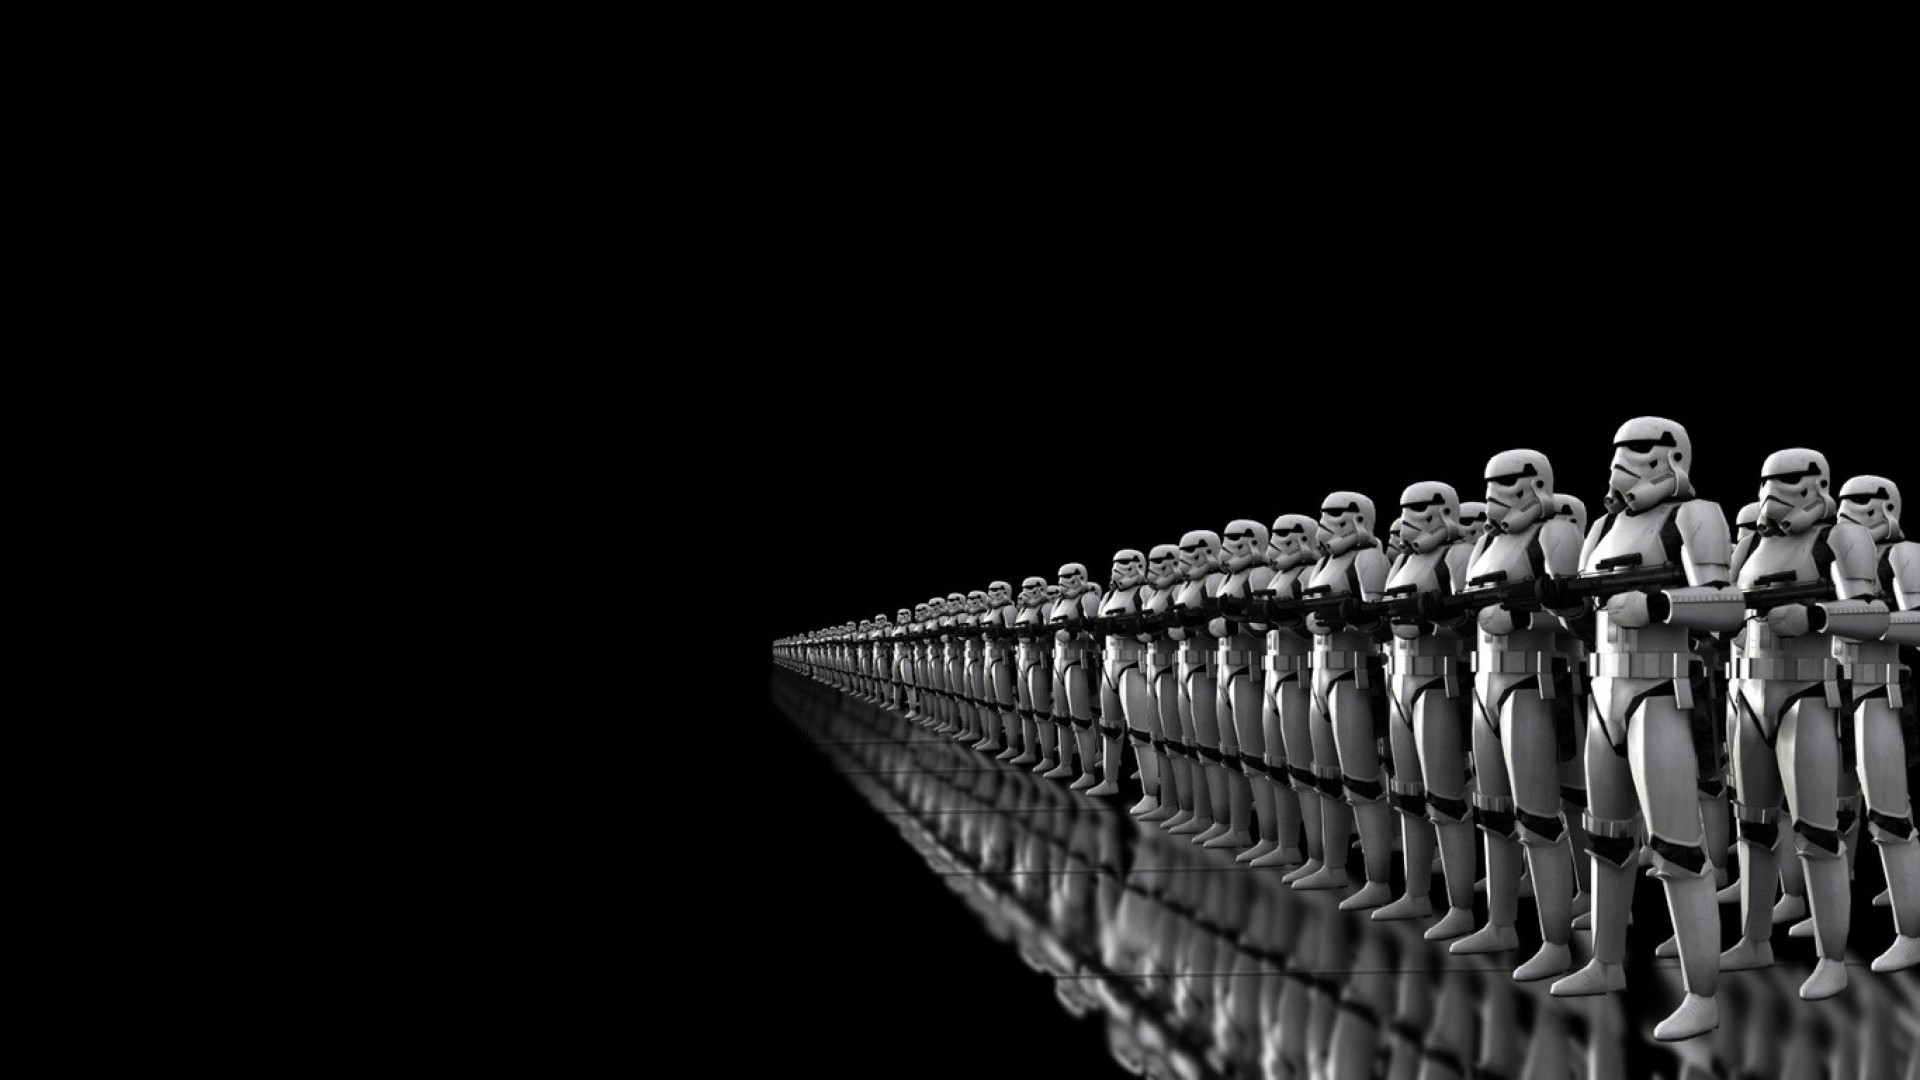 1920x1080 Star Wars Empire Pictures For Desktop Wallpaper 1920 x 1080 px 623.08 KB  lightsaber clone troopers